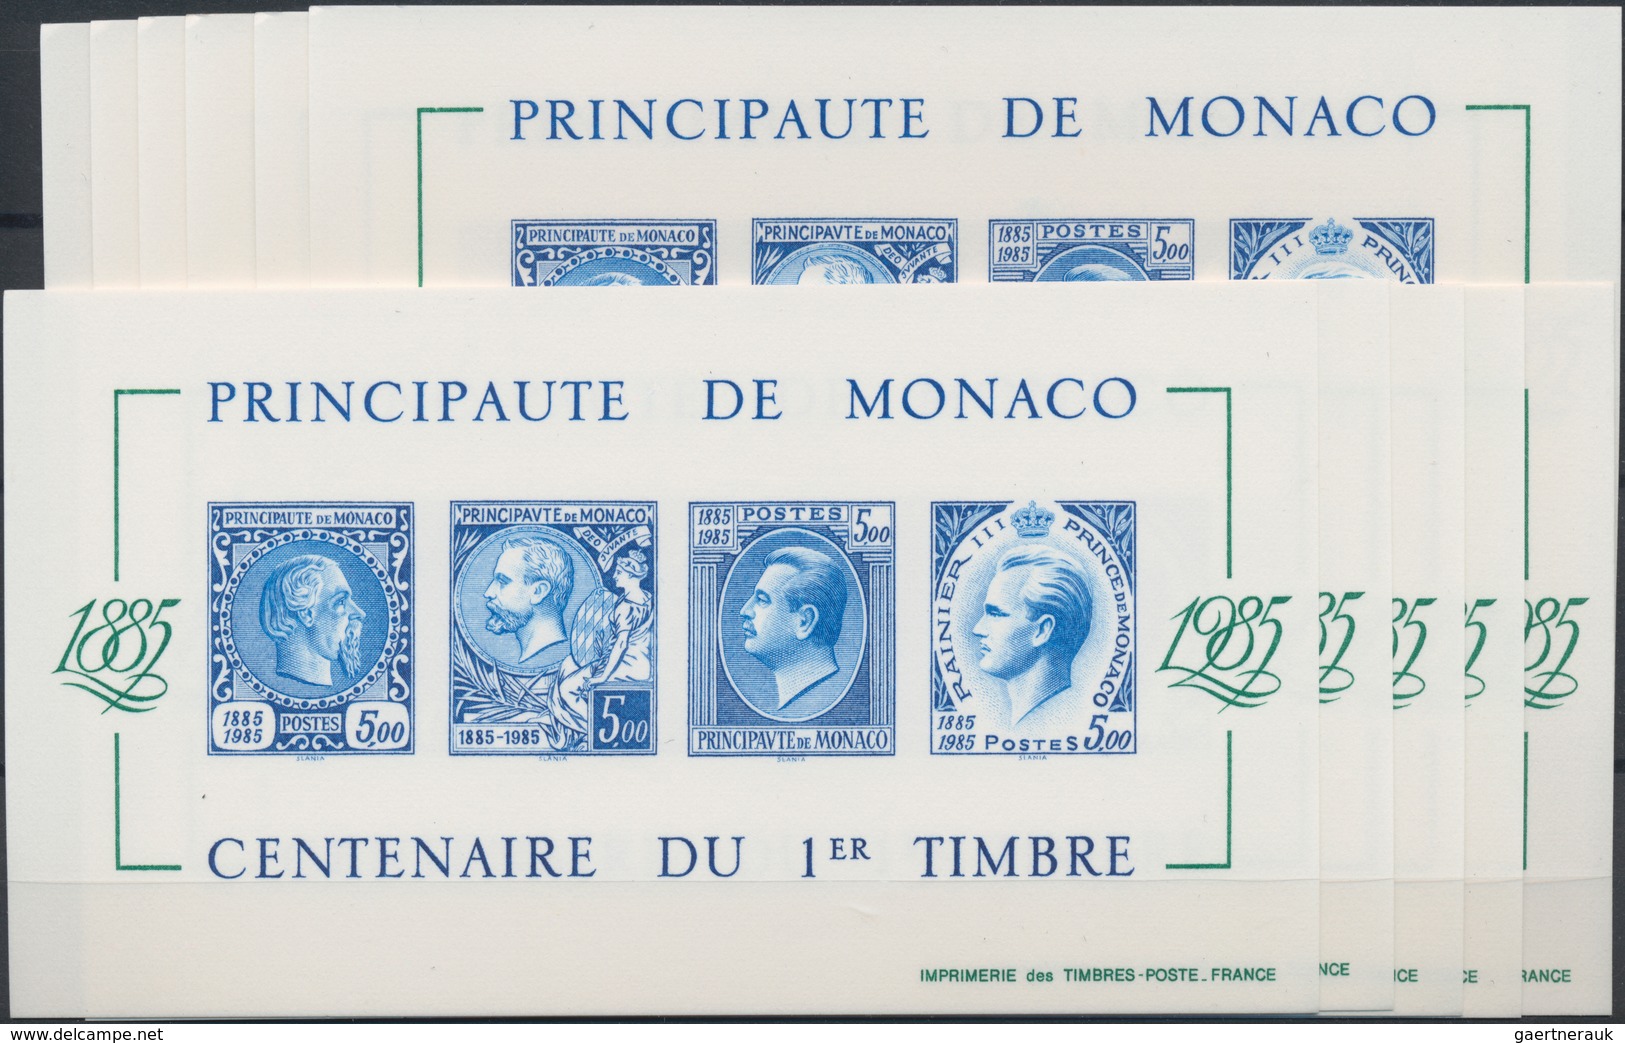 Monaco: 1985, Stamp Centenary Souvenir Sheet, Epreuve De Luxe On Thick Unwatermarked Paper And PTT I - Usados